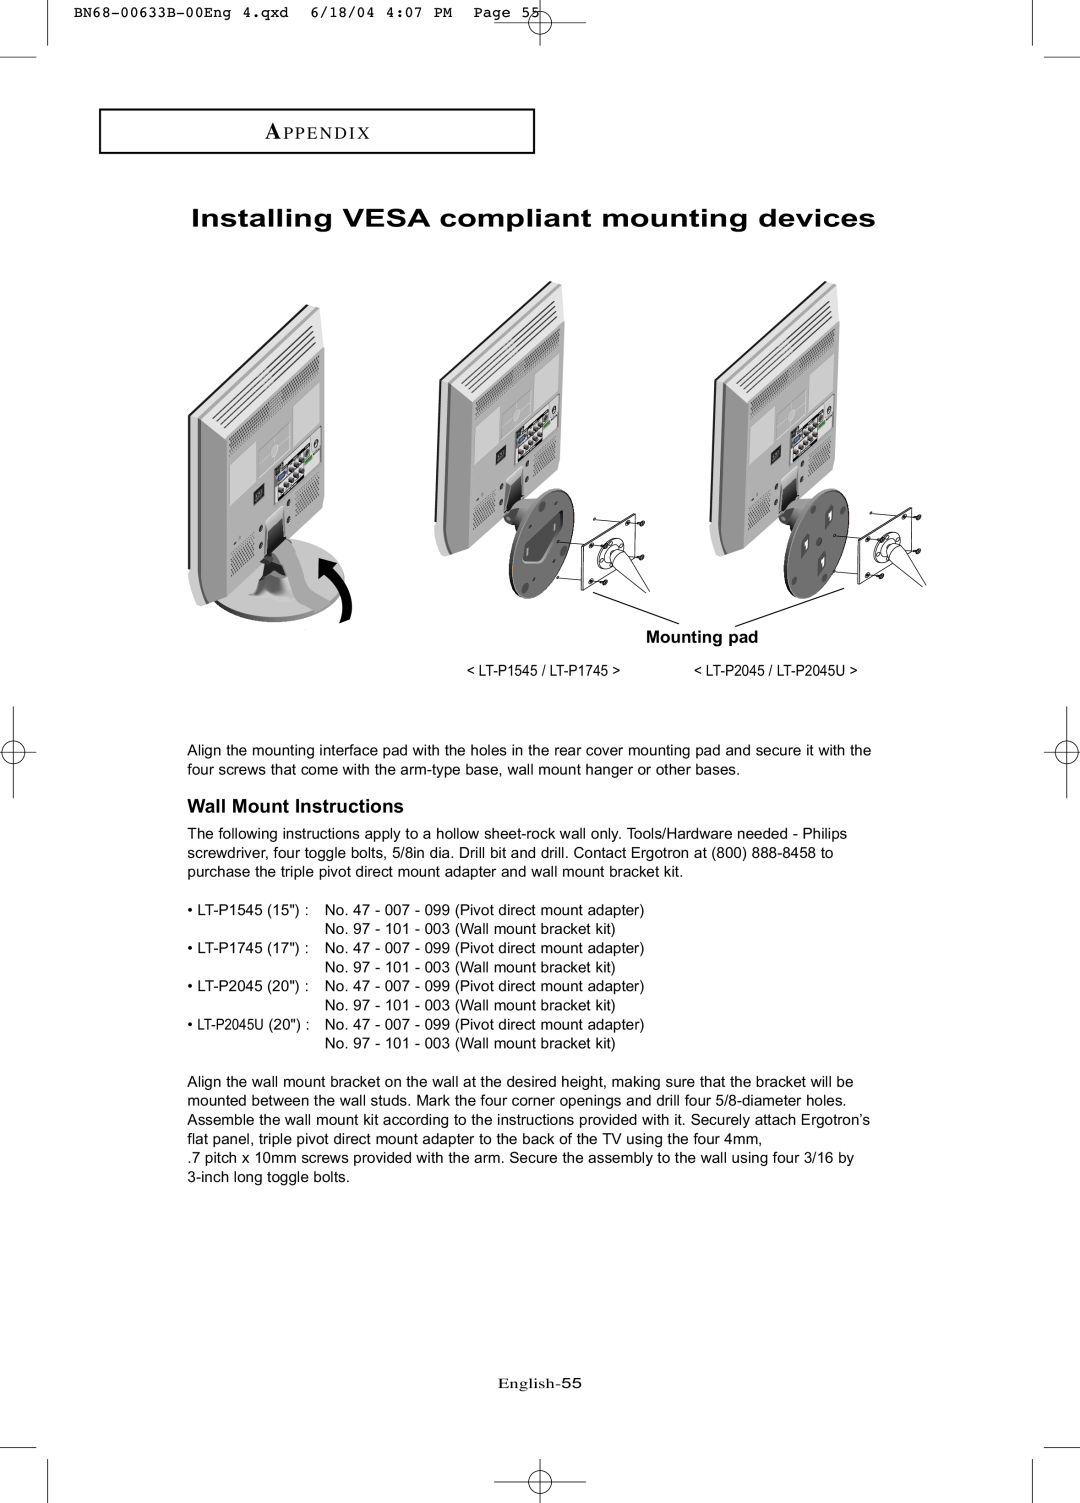 Samsung LT-P1545 manual Installing VESA compliant mounting devices, Wall Mount Instructions, A P P E N D I, Mounting pad 